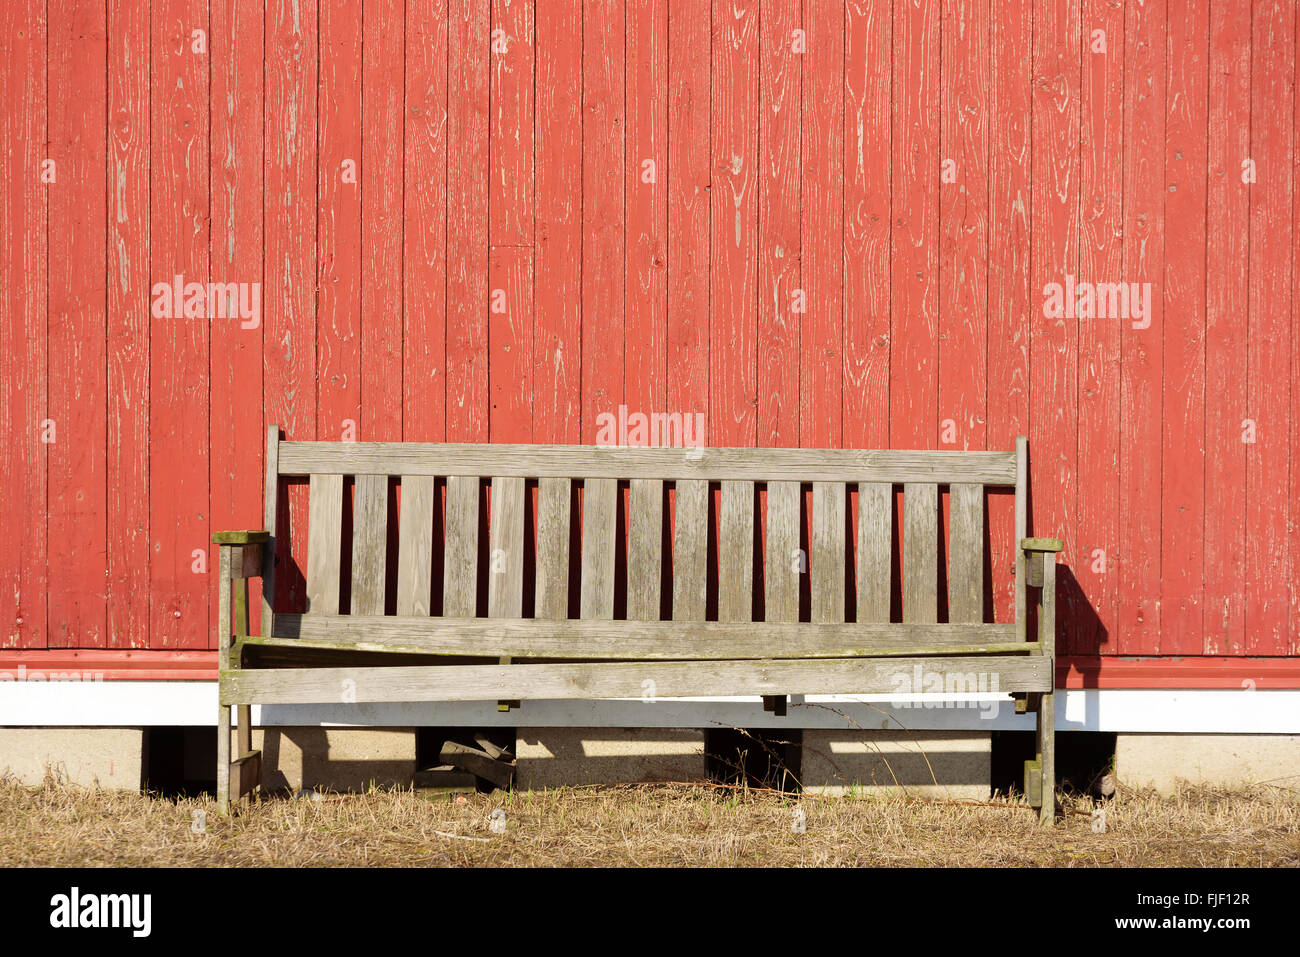 An old unpainted bench against a red wooden wall. Sun is shining at the empty outdoor furniture. Copy space on wall. Stock Photo